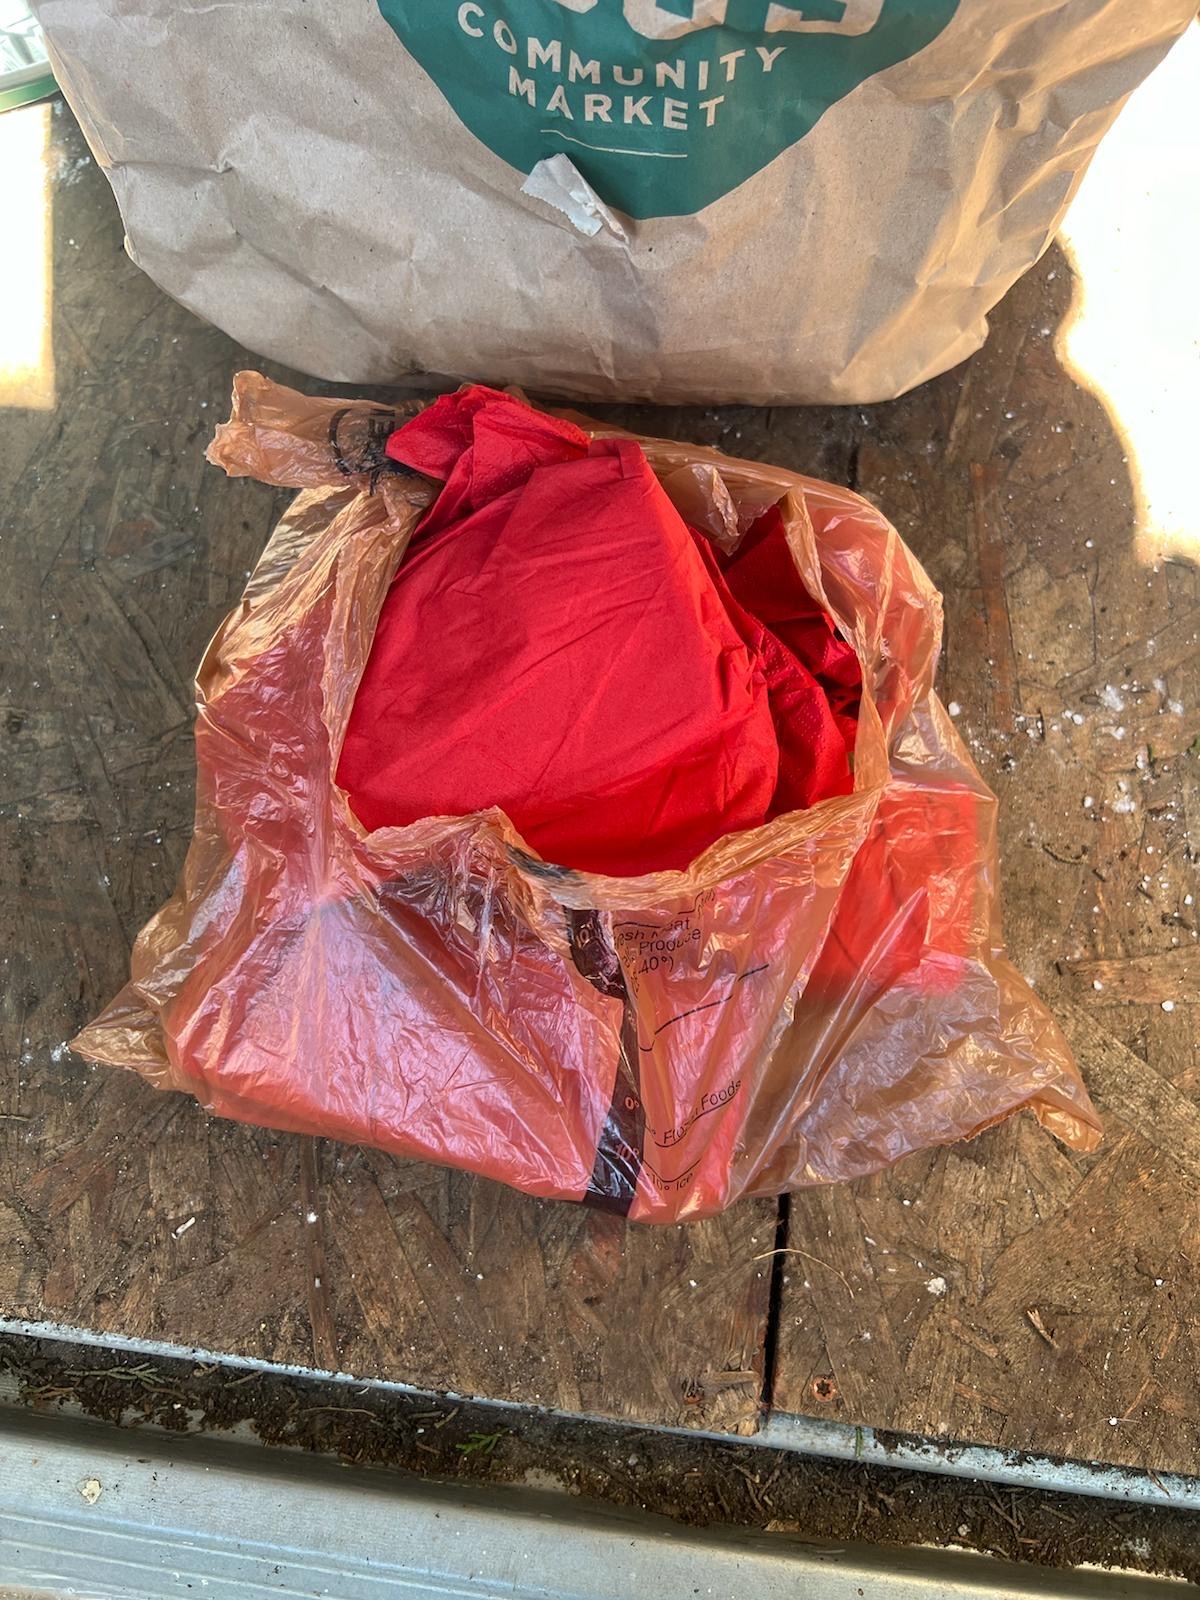 A red cloth is partially visible within a red plastic bag, resting on a wooden surface next to a torn paper bag labeled &quot;COMMUNITY MARKET.&quot;